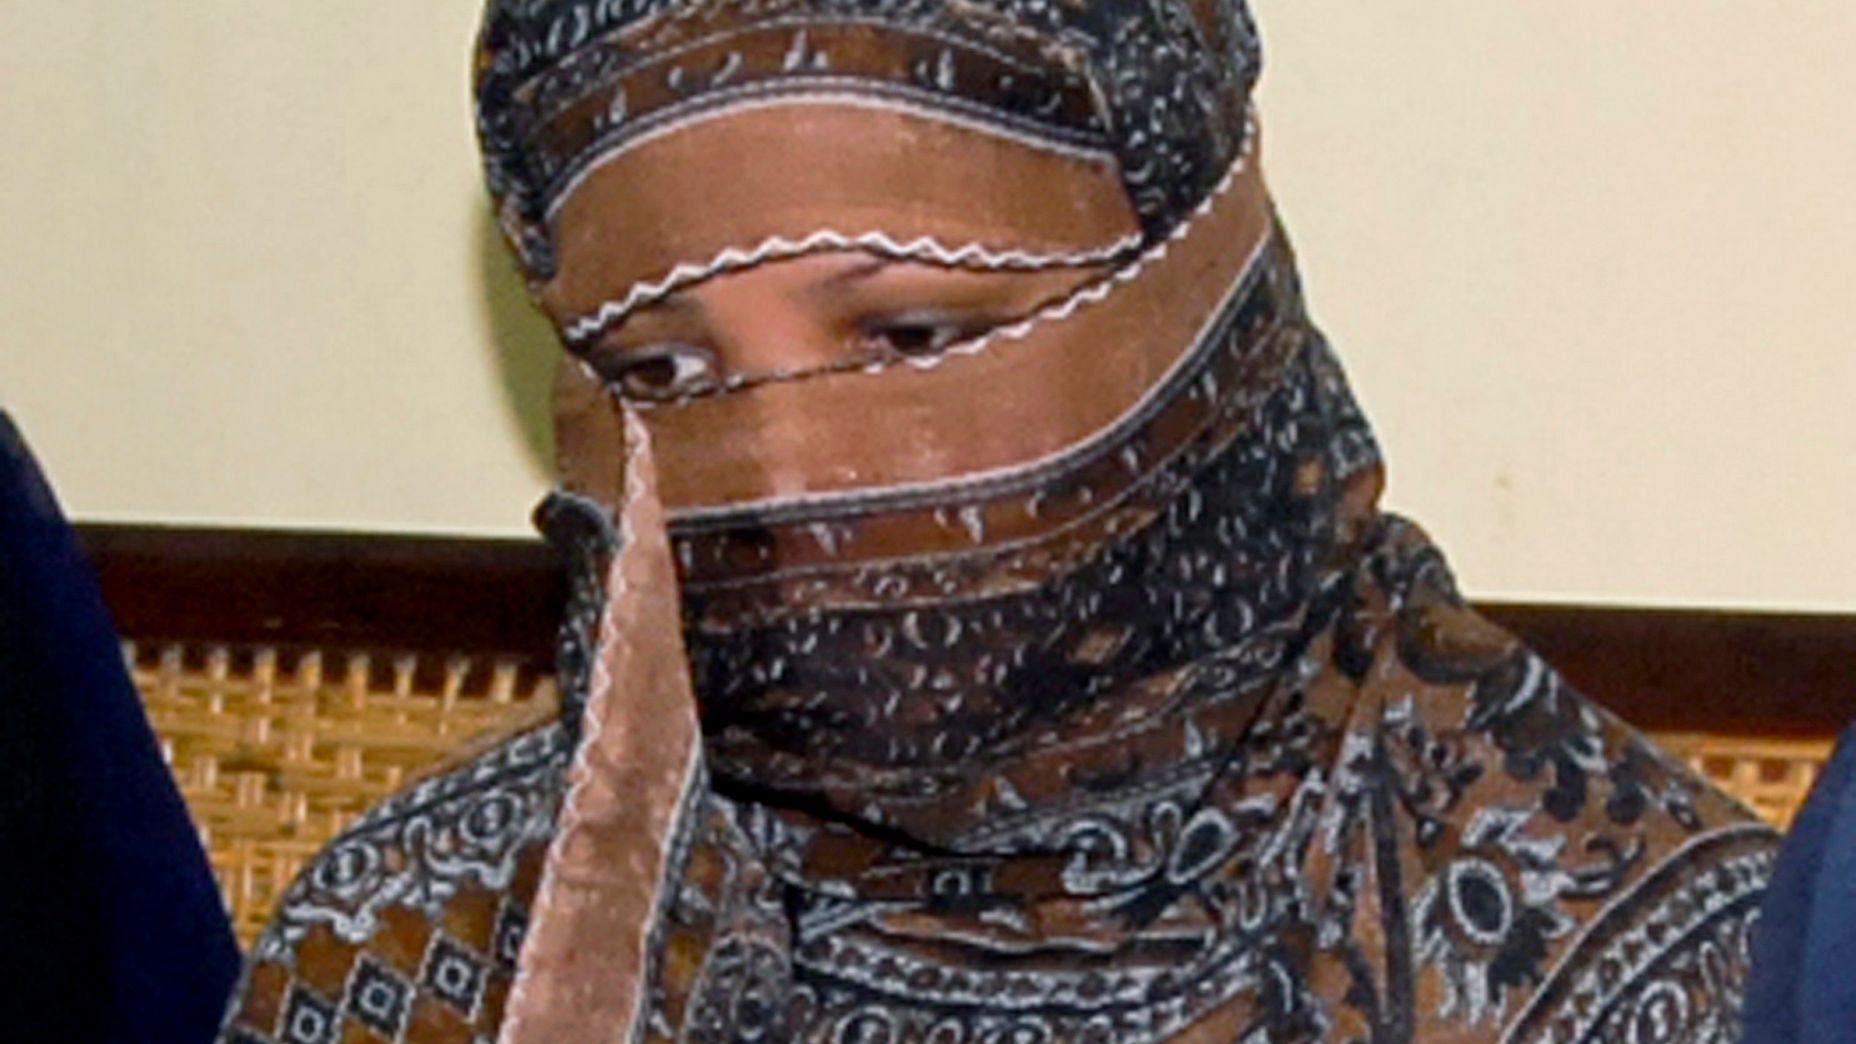 The Foreign Ministry said it was coordinating with other countries to ensure the safety for Asia Bibi and her family.